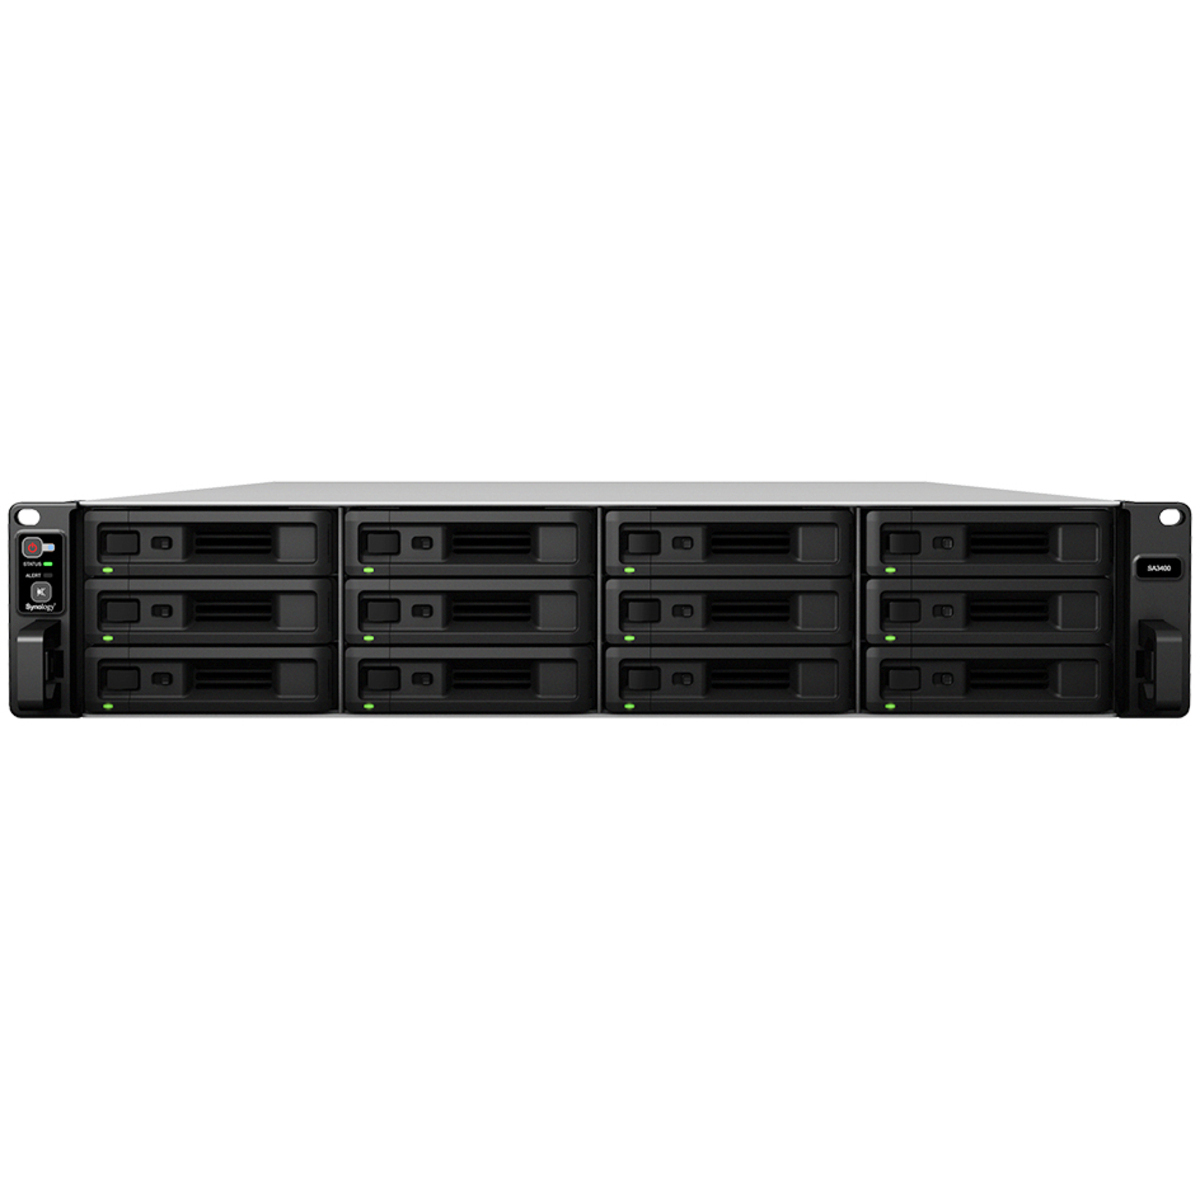 buy $9023 Synology RackStation SA3400 48tb RackMount NAS - Network Attached Storage Device 12x4000gb Western Digital Blue WD40EZRZ 3.5 5400rpm SATA 6Gb/s HDD CONSUMER Class Drives Installed - Burn-In Tested - nas headquarters buy network attached storage server device das new raid-5 free shipping usa christmas new year holiday sale RackStation SA3400